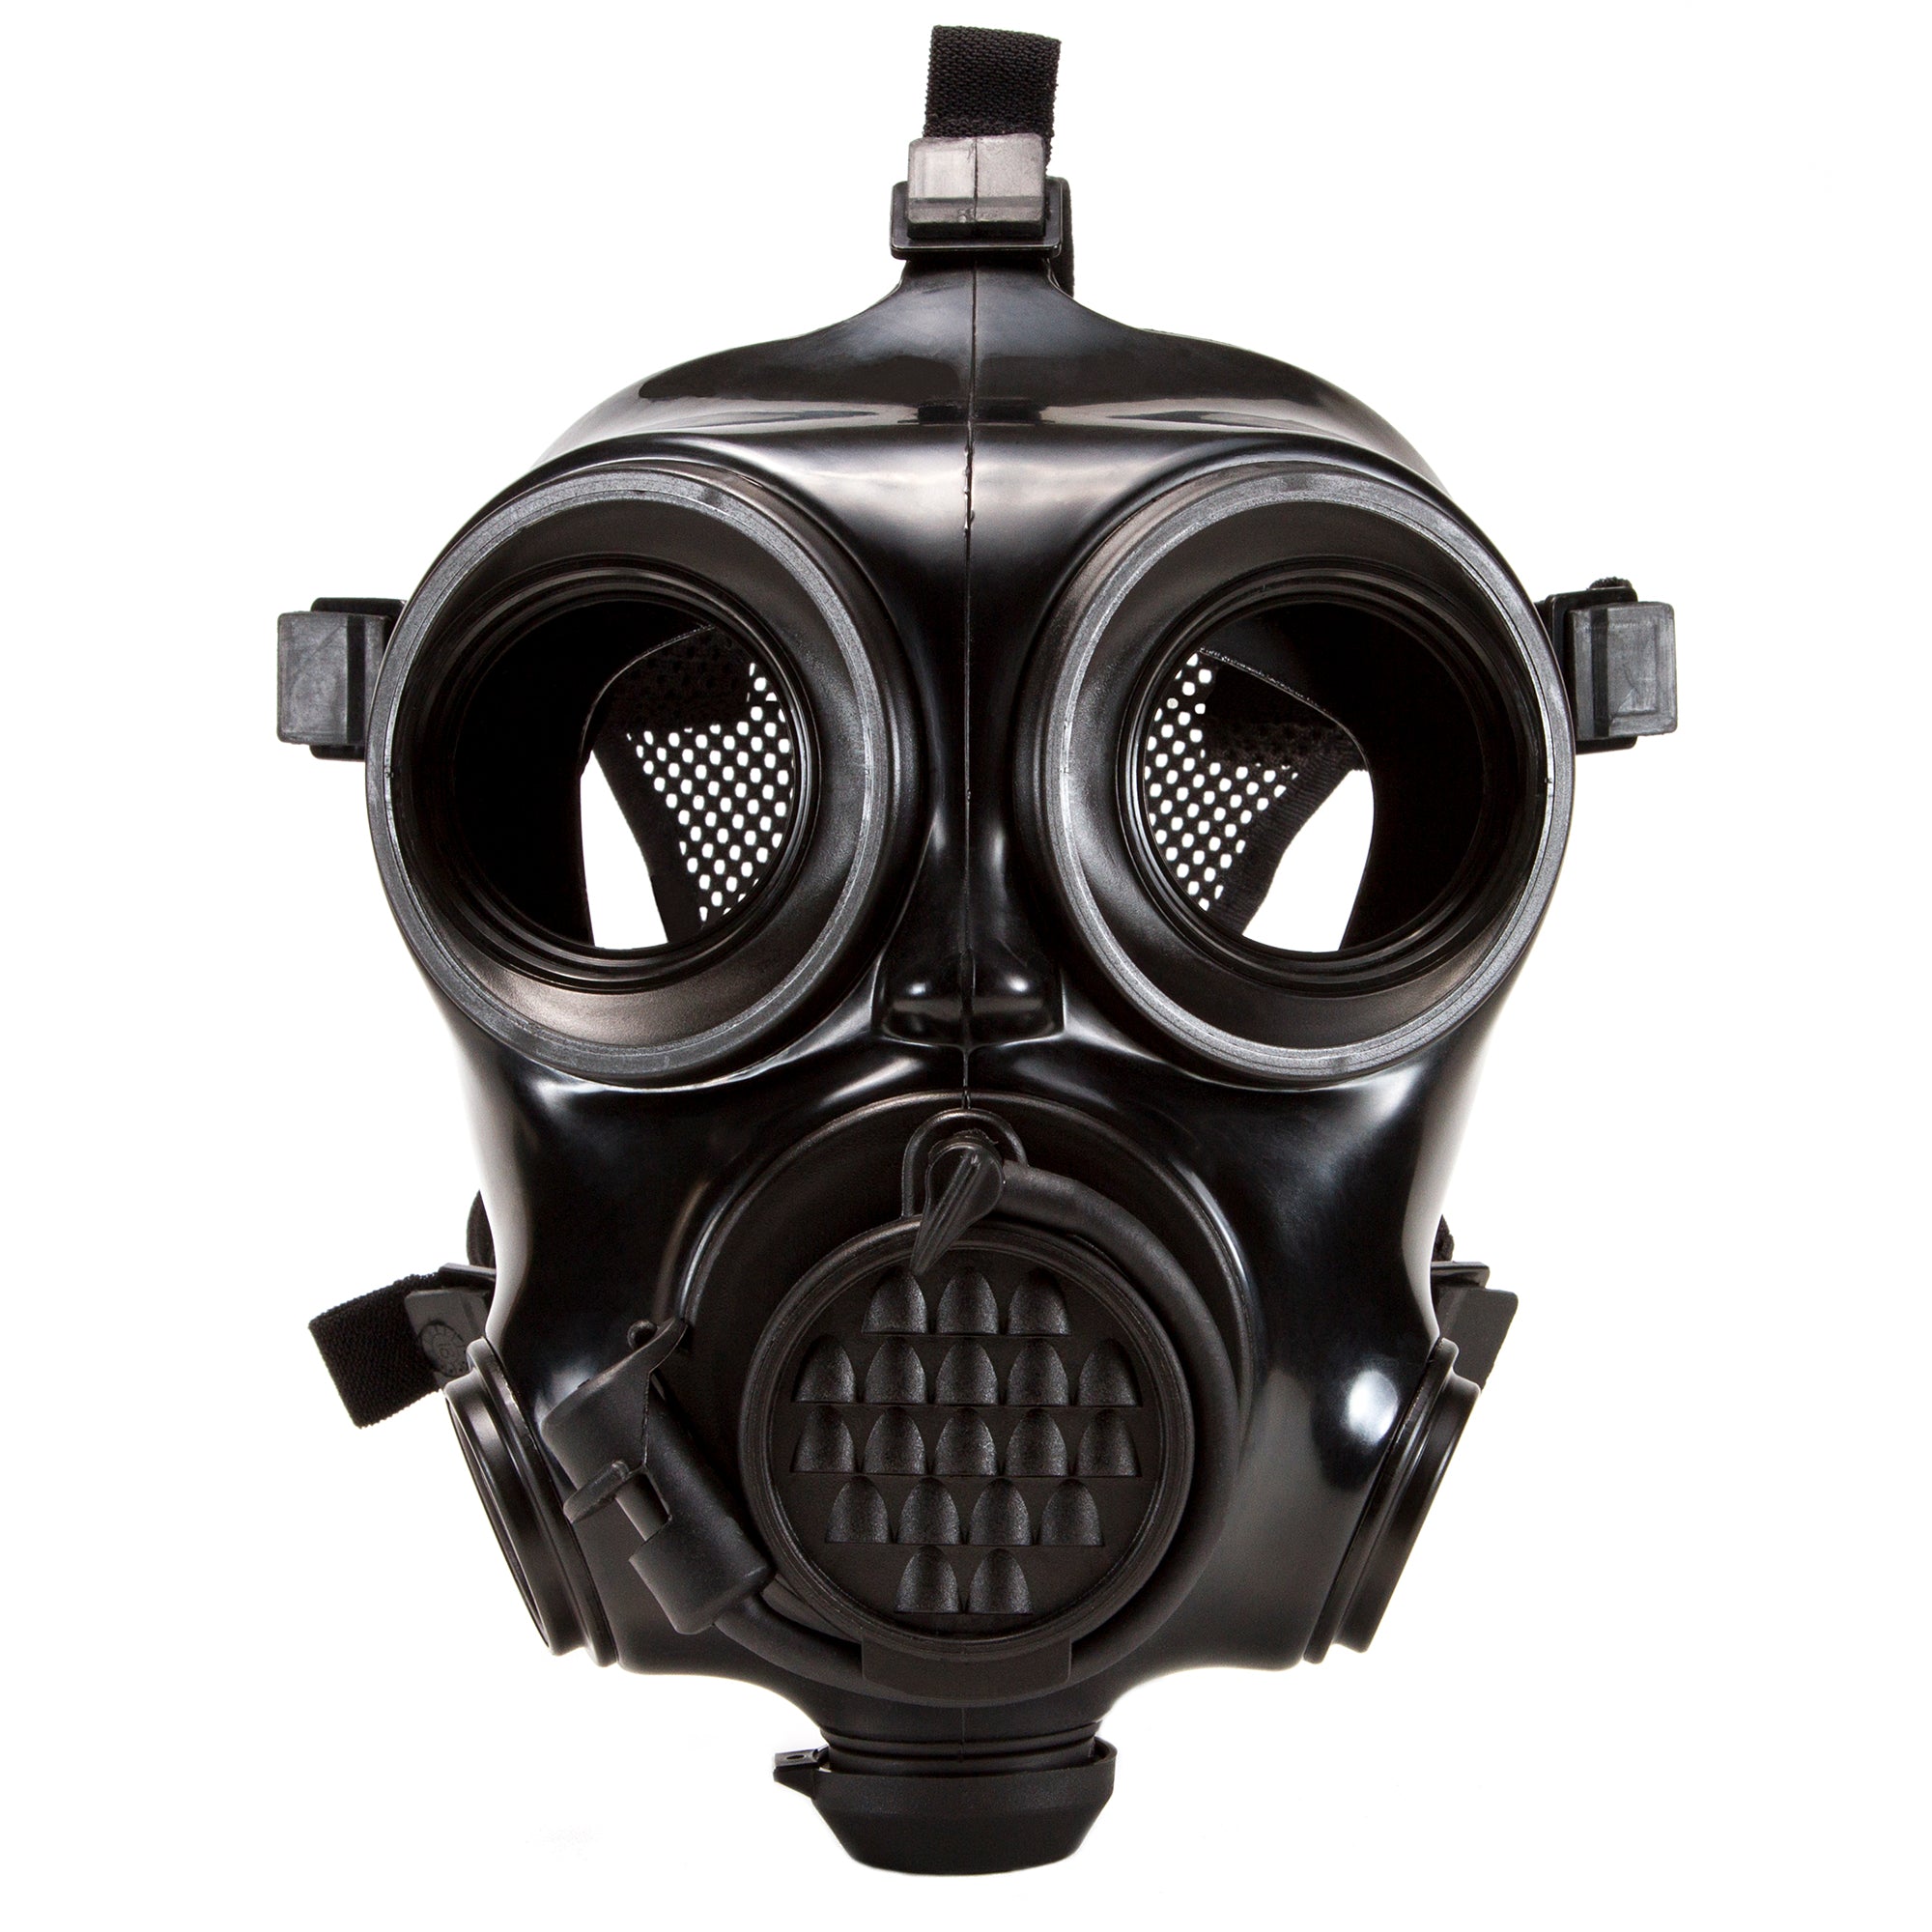 Image of CM-7M Military Gas Mask